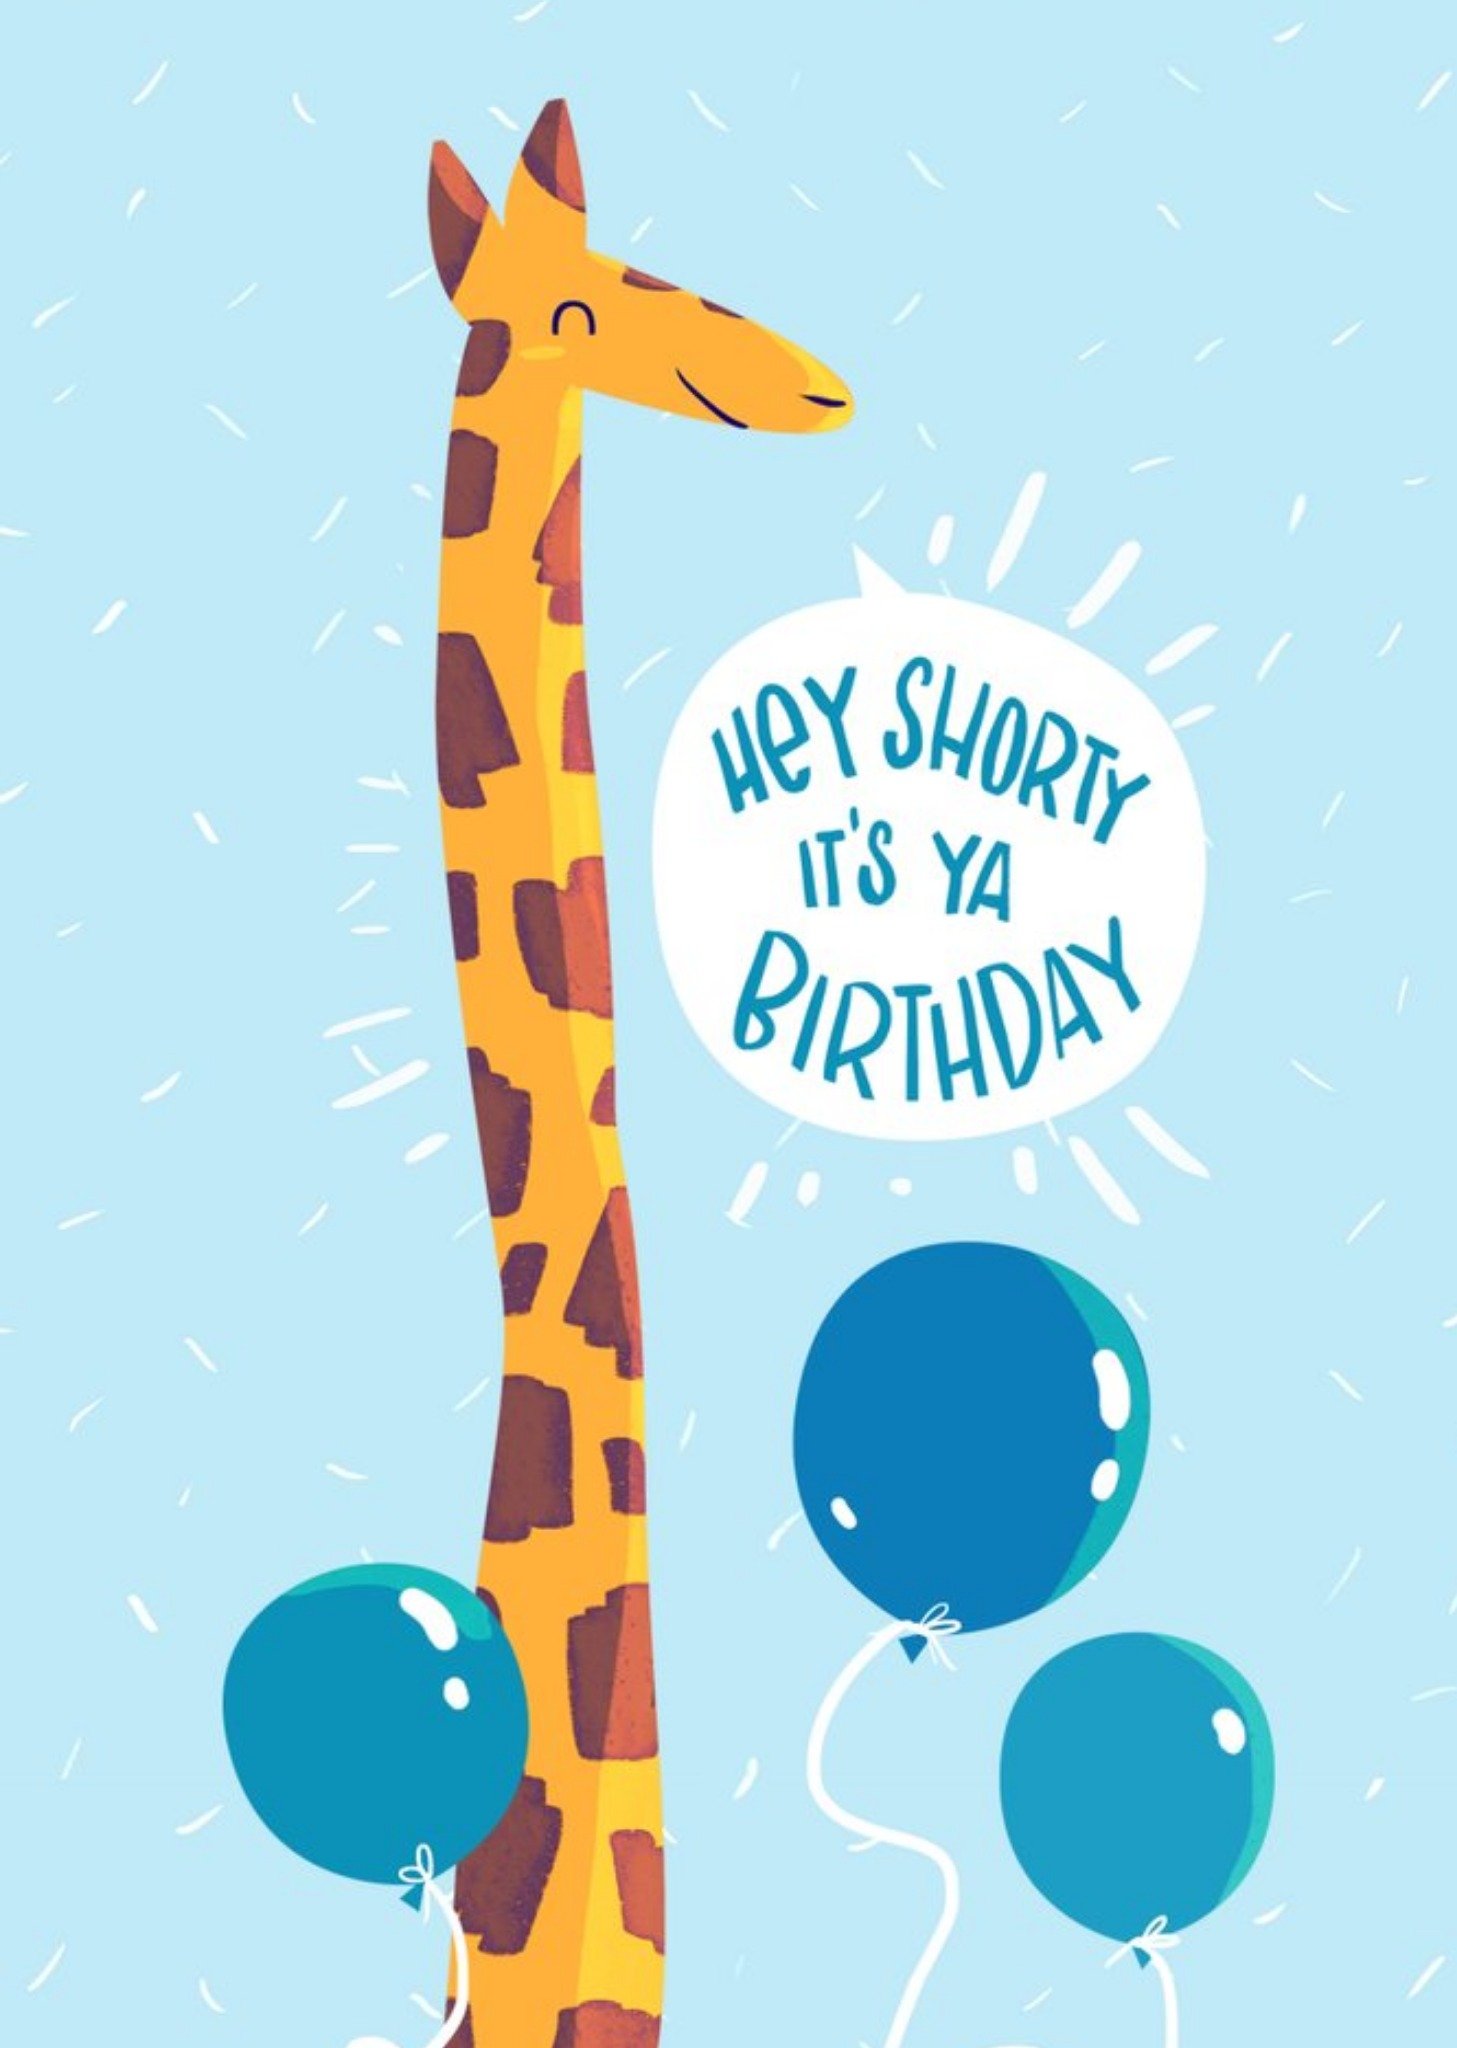 Moonpig Illustration Of A Giraffe With Balloon On An Blue Background Hey Shorty Birthday Card, Large